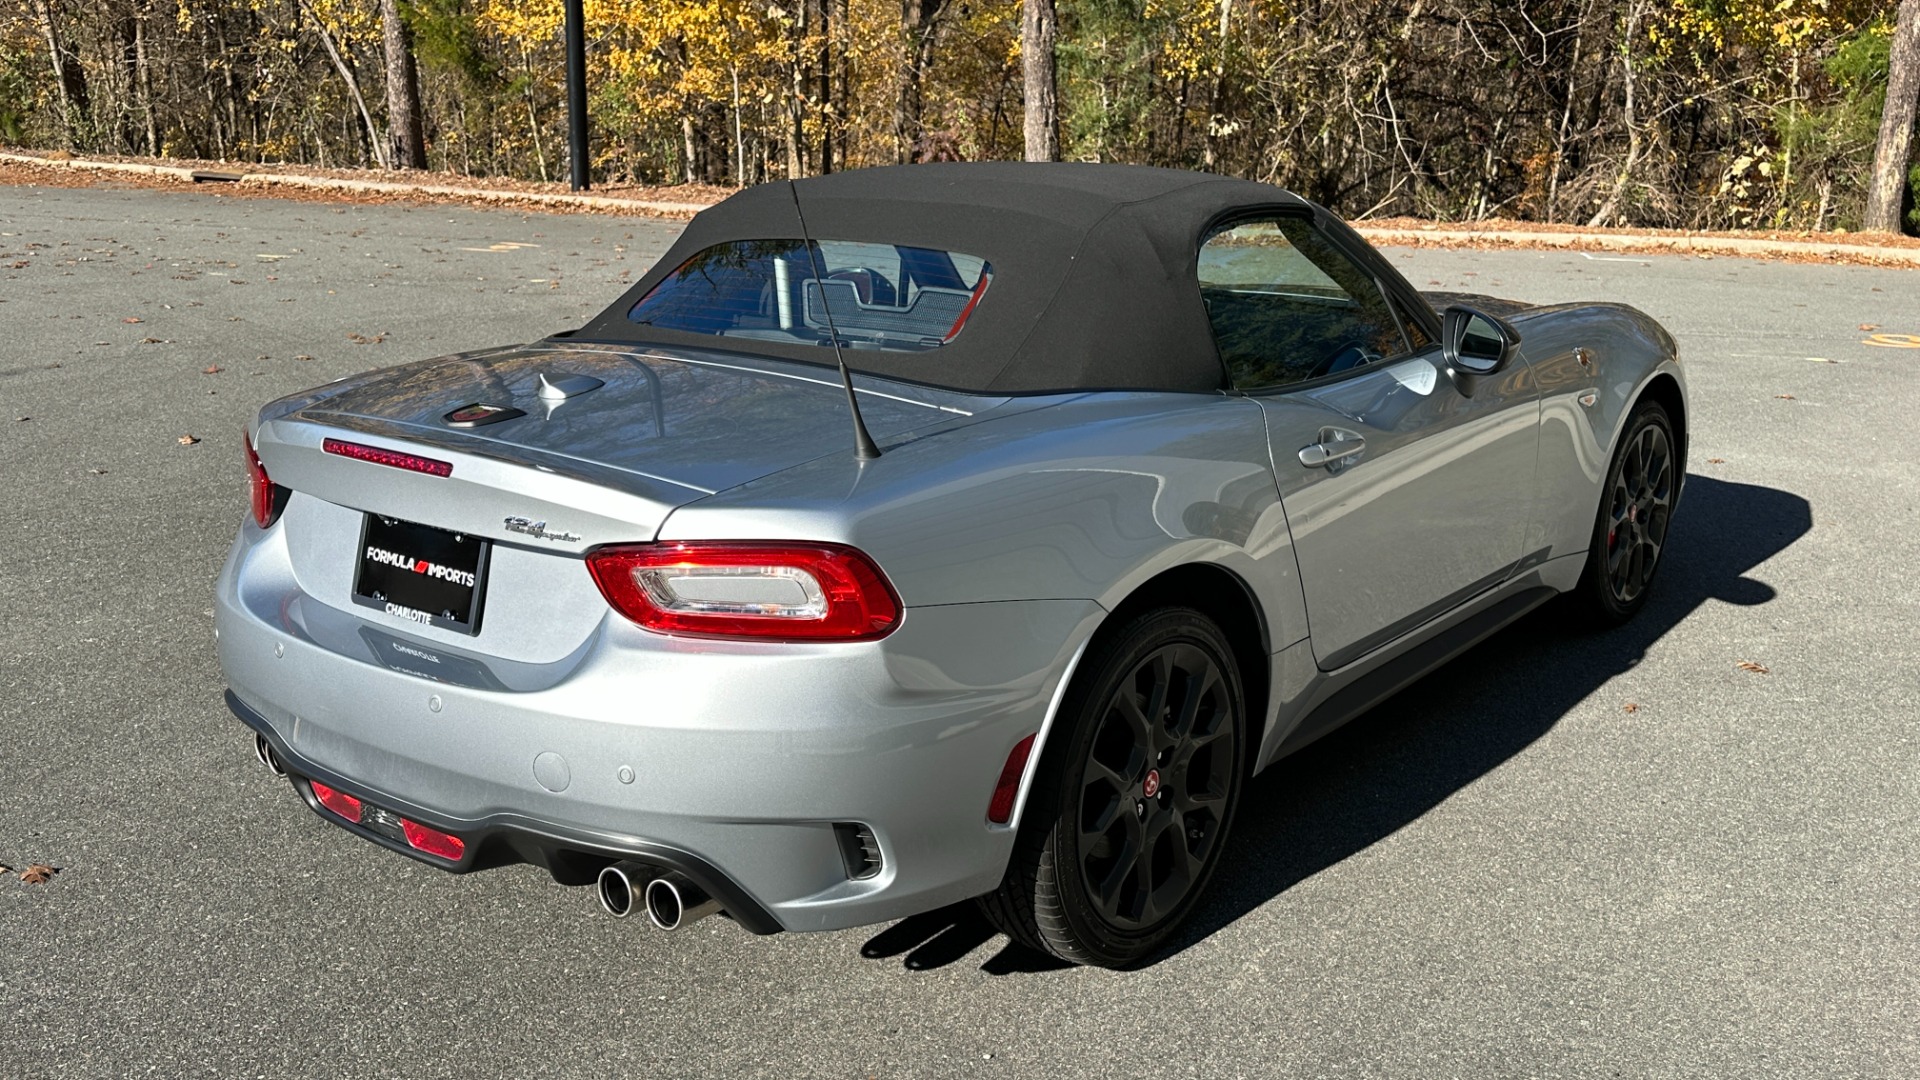 Used 2020 FIAT 124 Spider ARBARTH / MONZA EXHAUST / RECARO SPORT SEATS / BREMBO BRAKES / 6 SPEED for sale $29,995 at Formula Imports in Charlotte NC 28227 7